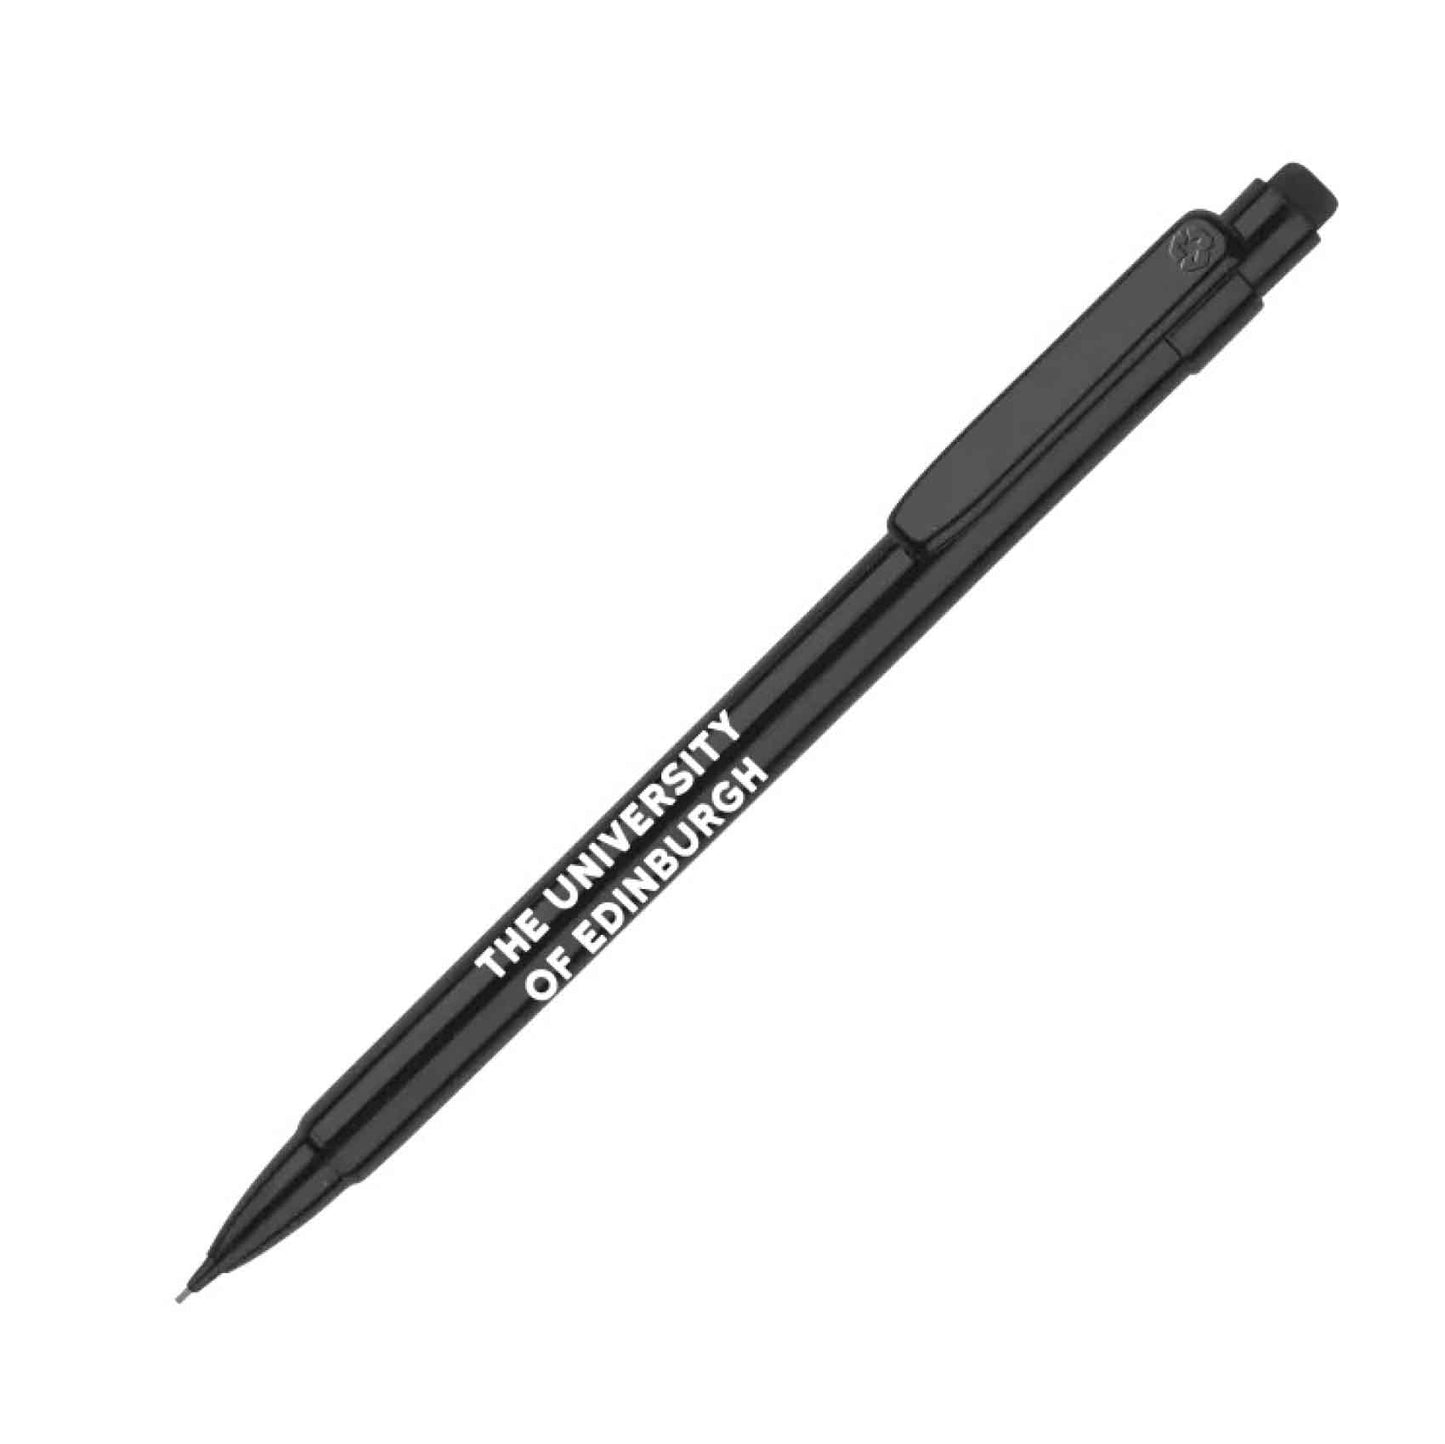 Black recycled plastic mechanical pencil with 'The University of Edinburgh' printed on the barrel in white bold print. 